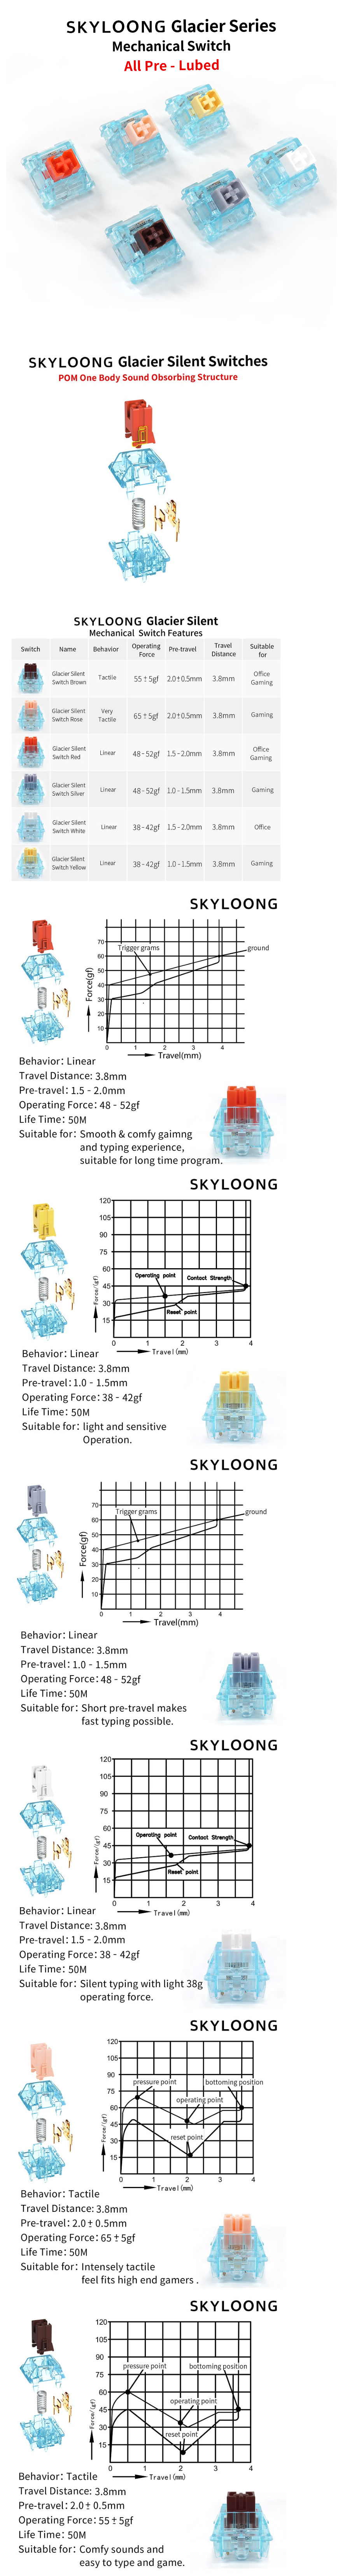 Skyloong Glacier Switches